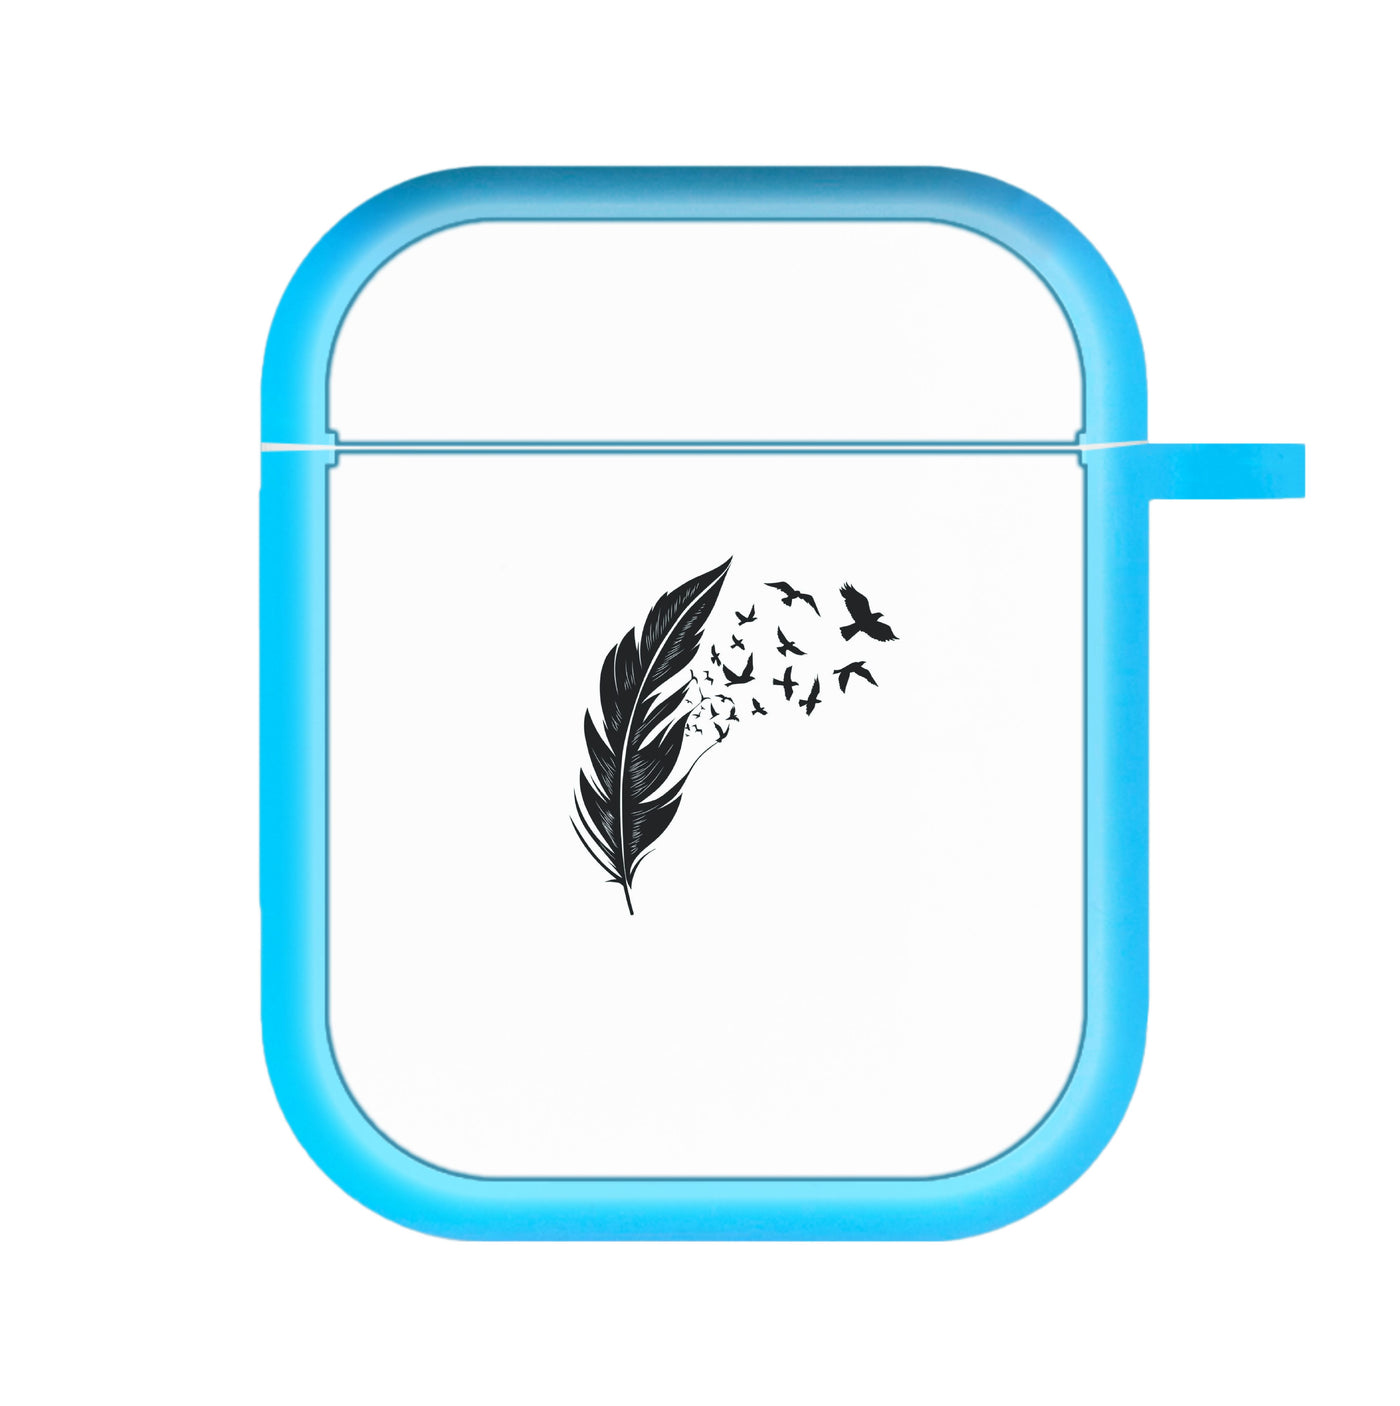 Birds From Feathers - The Originals AirPods Case